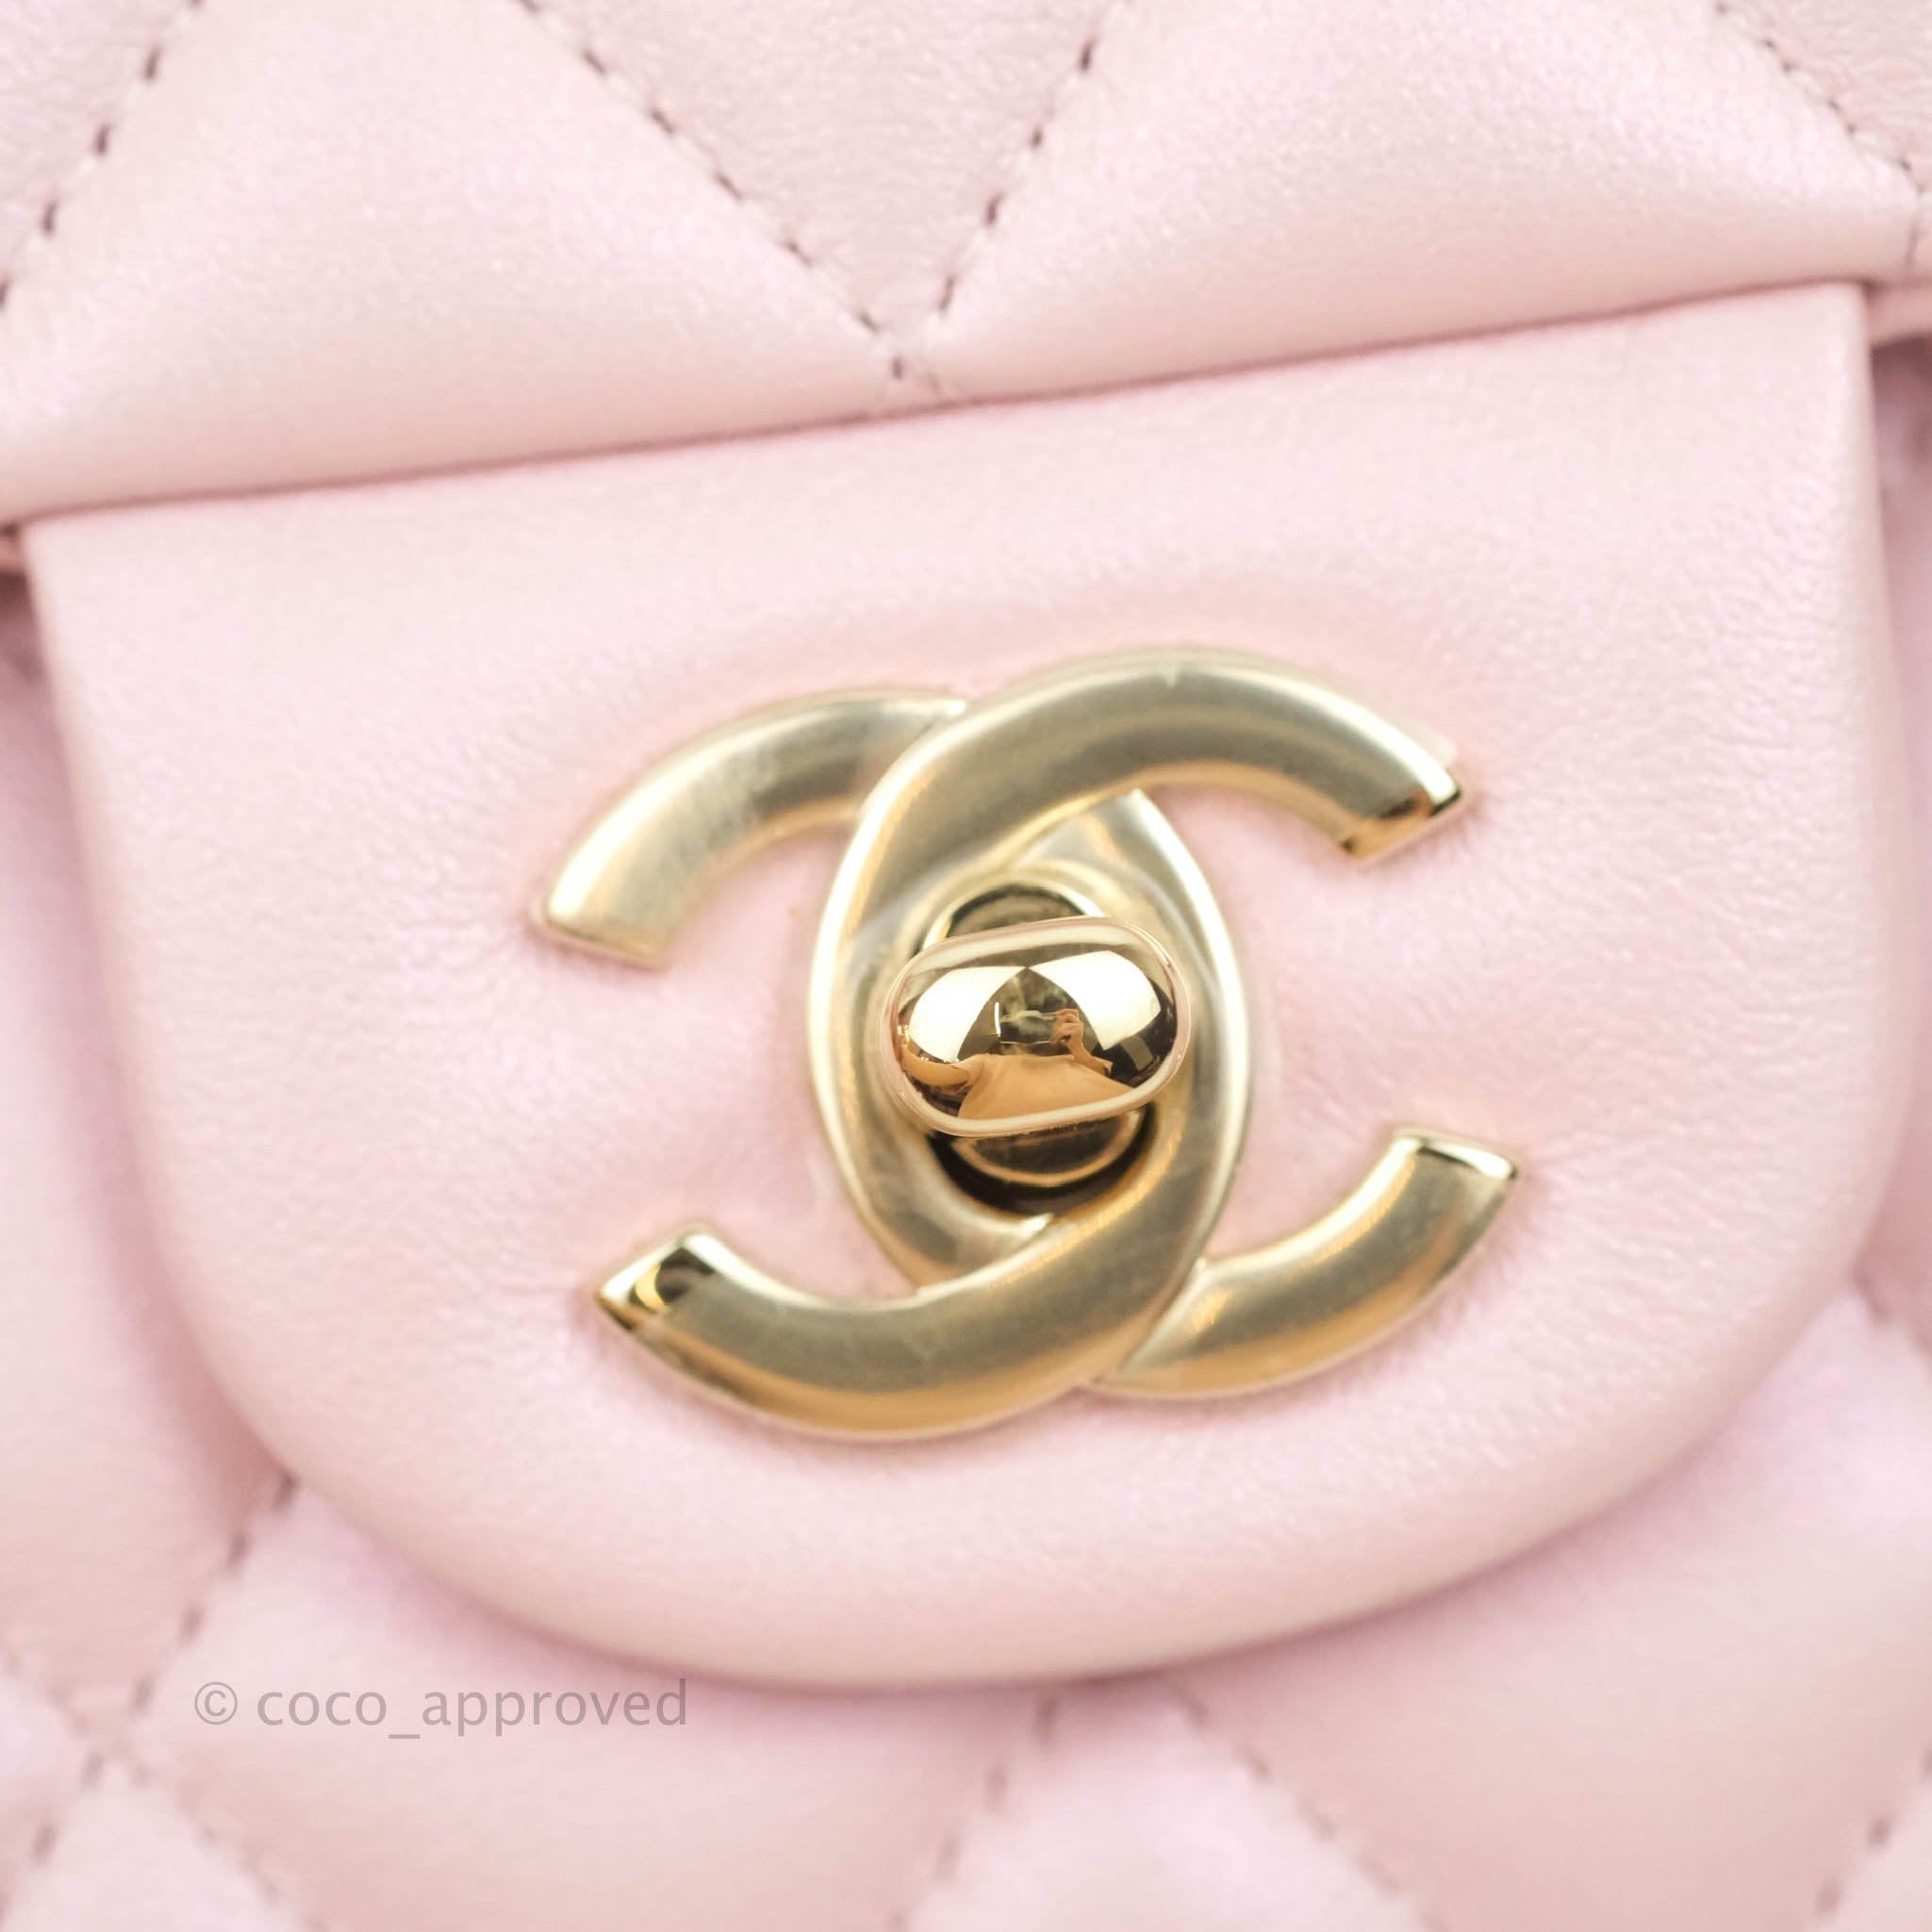 Chanel Quilted M/L Medium Double Flap Bag Iridescent Pink Calfskin Gol –  Coco Approved Studio